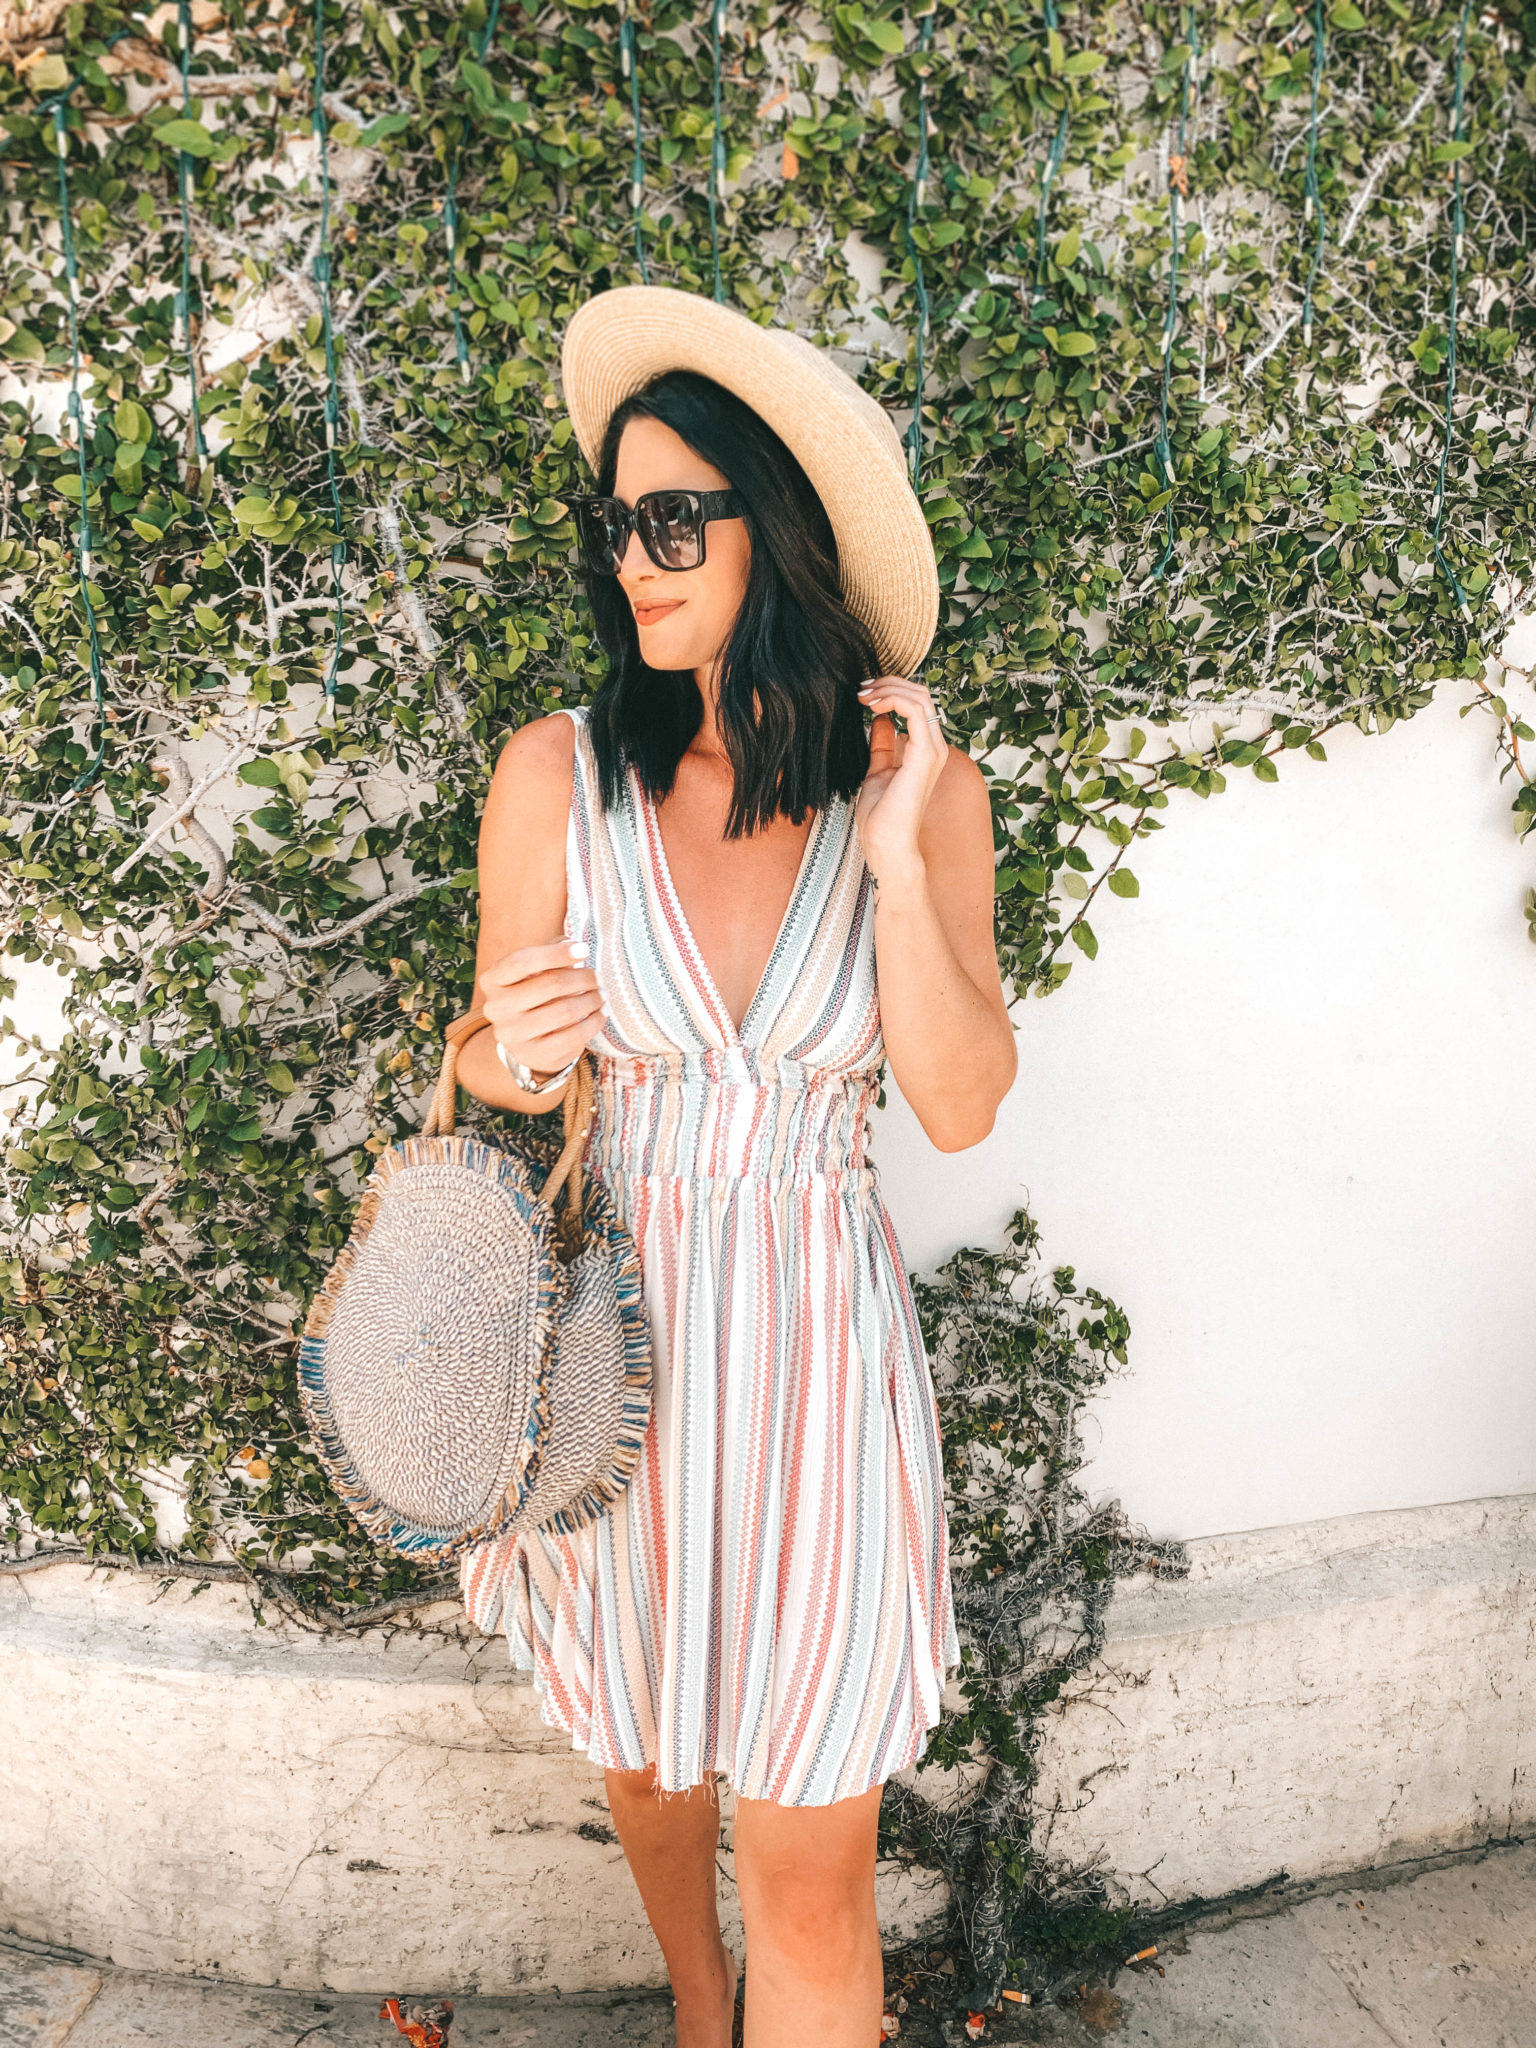 Amaryllis Apparel Abroad Turks & Caicos Summer Try-On by popular Austin fashion blog, Dressed to Kill: image of a woman standing outside in Turk and Caicos and wearing a striped Amaryllis Apparel Sorrento Stripe Dress.